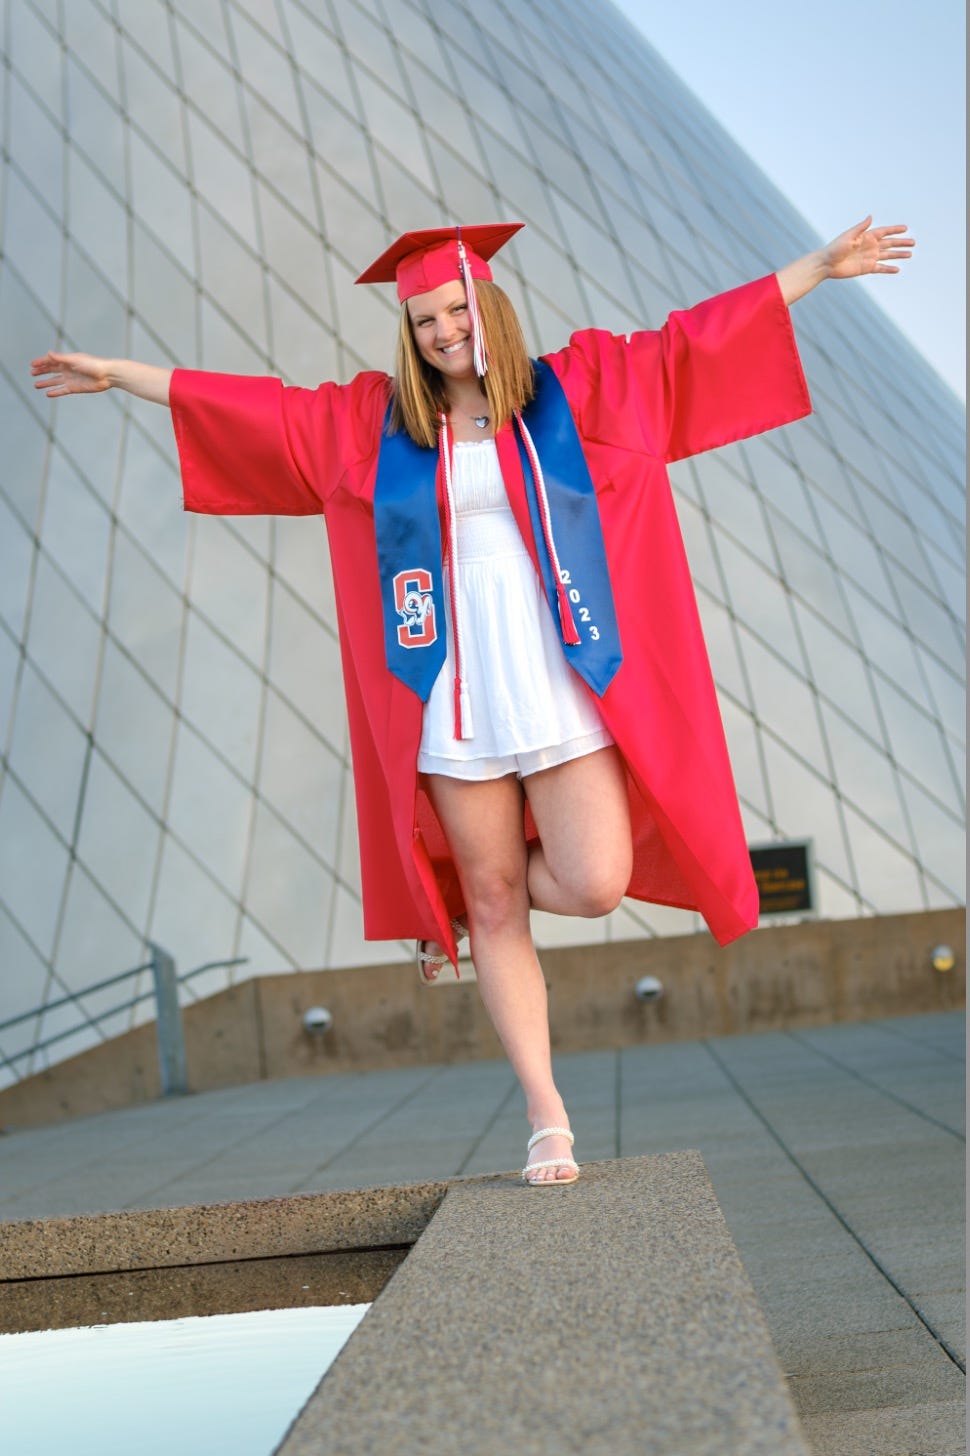 A young woman wearing a red cap and gown and a blue sash balances on one leg in front of the metal cone sculpture at the Museum of Glass.